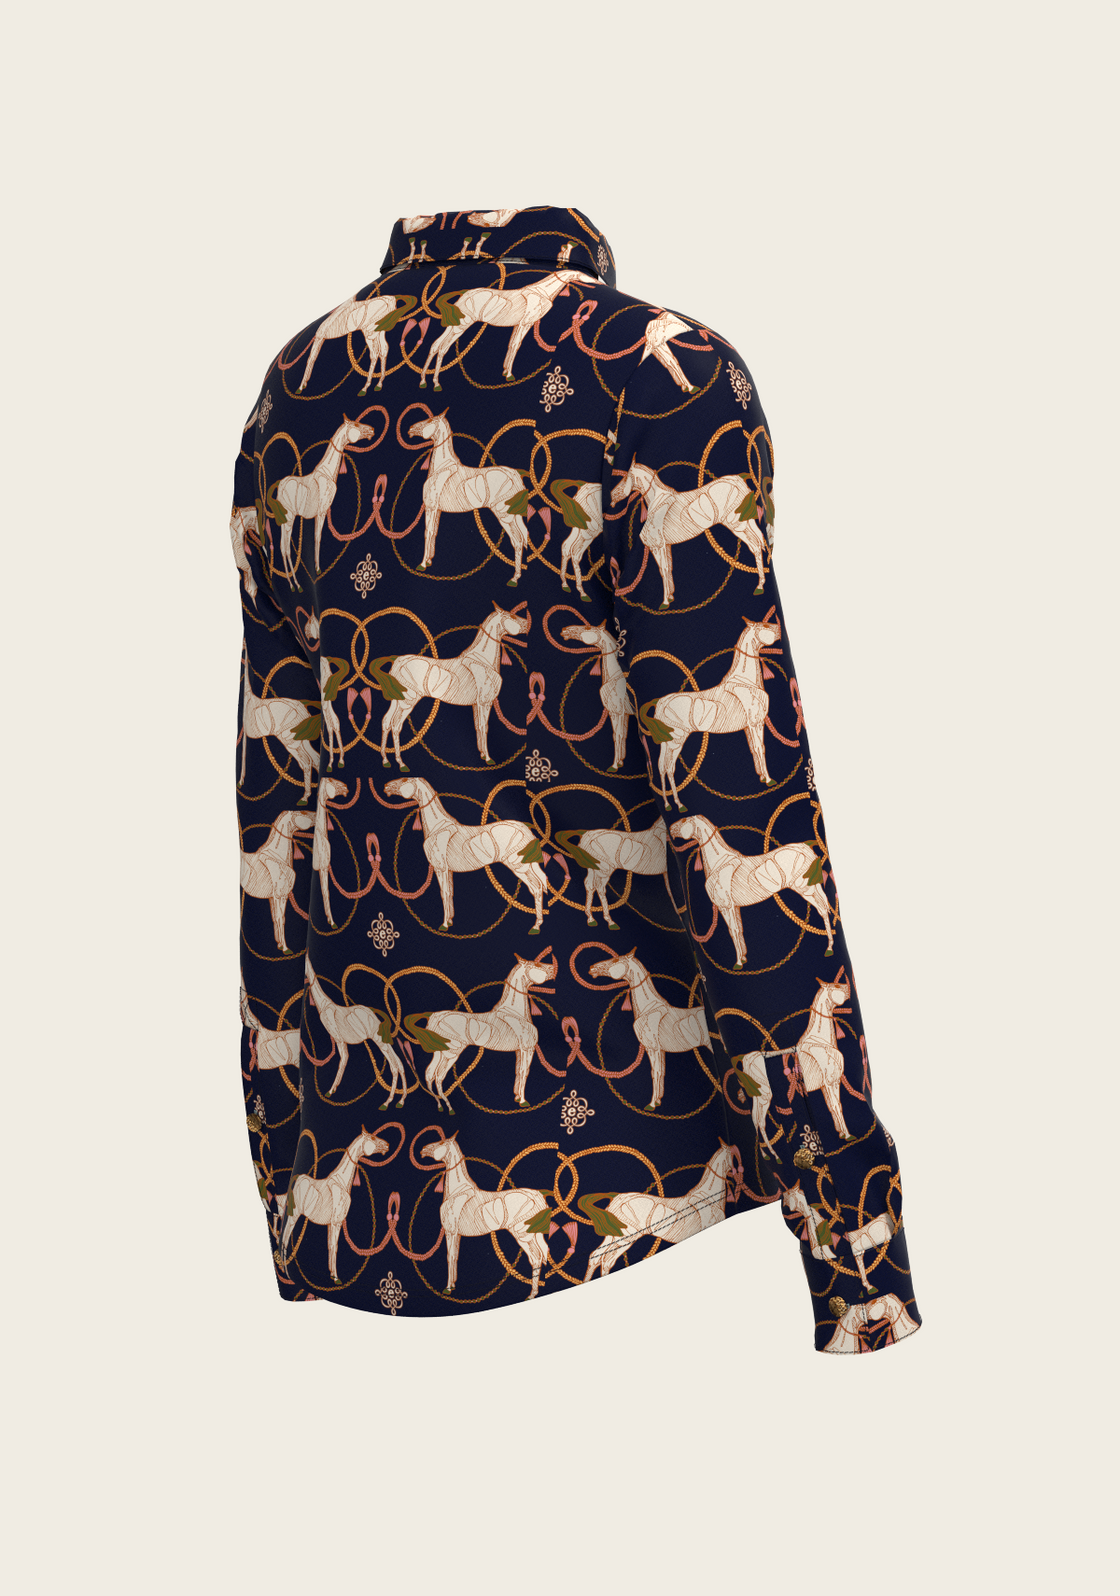 Roped Horses on Navy Ladies Button Shirt